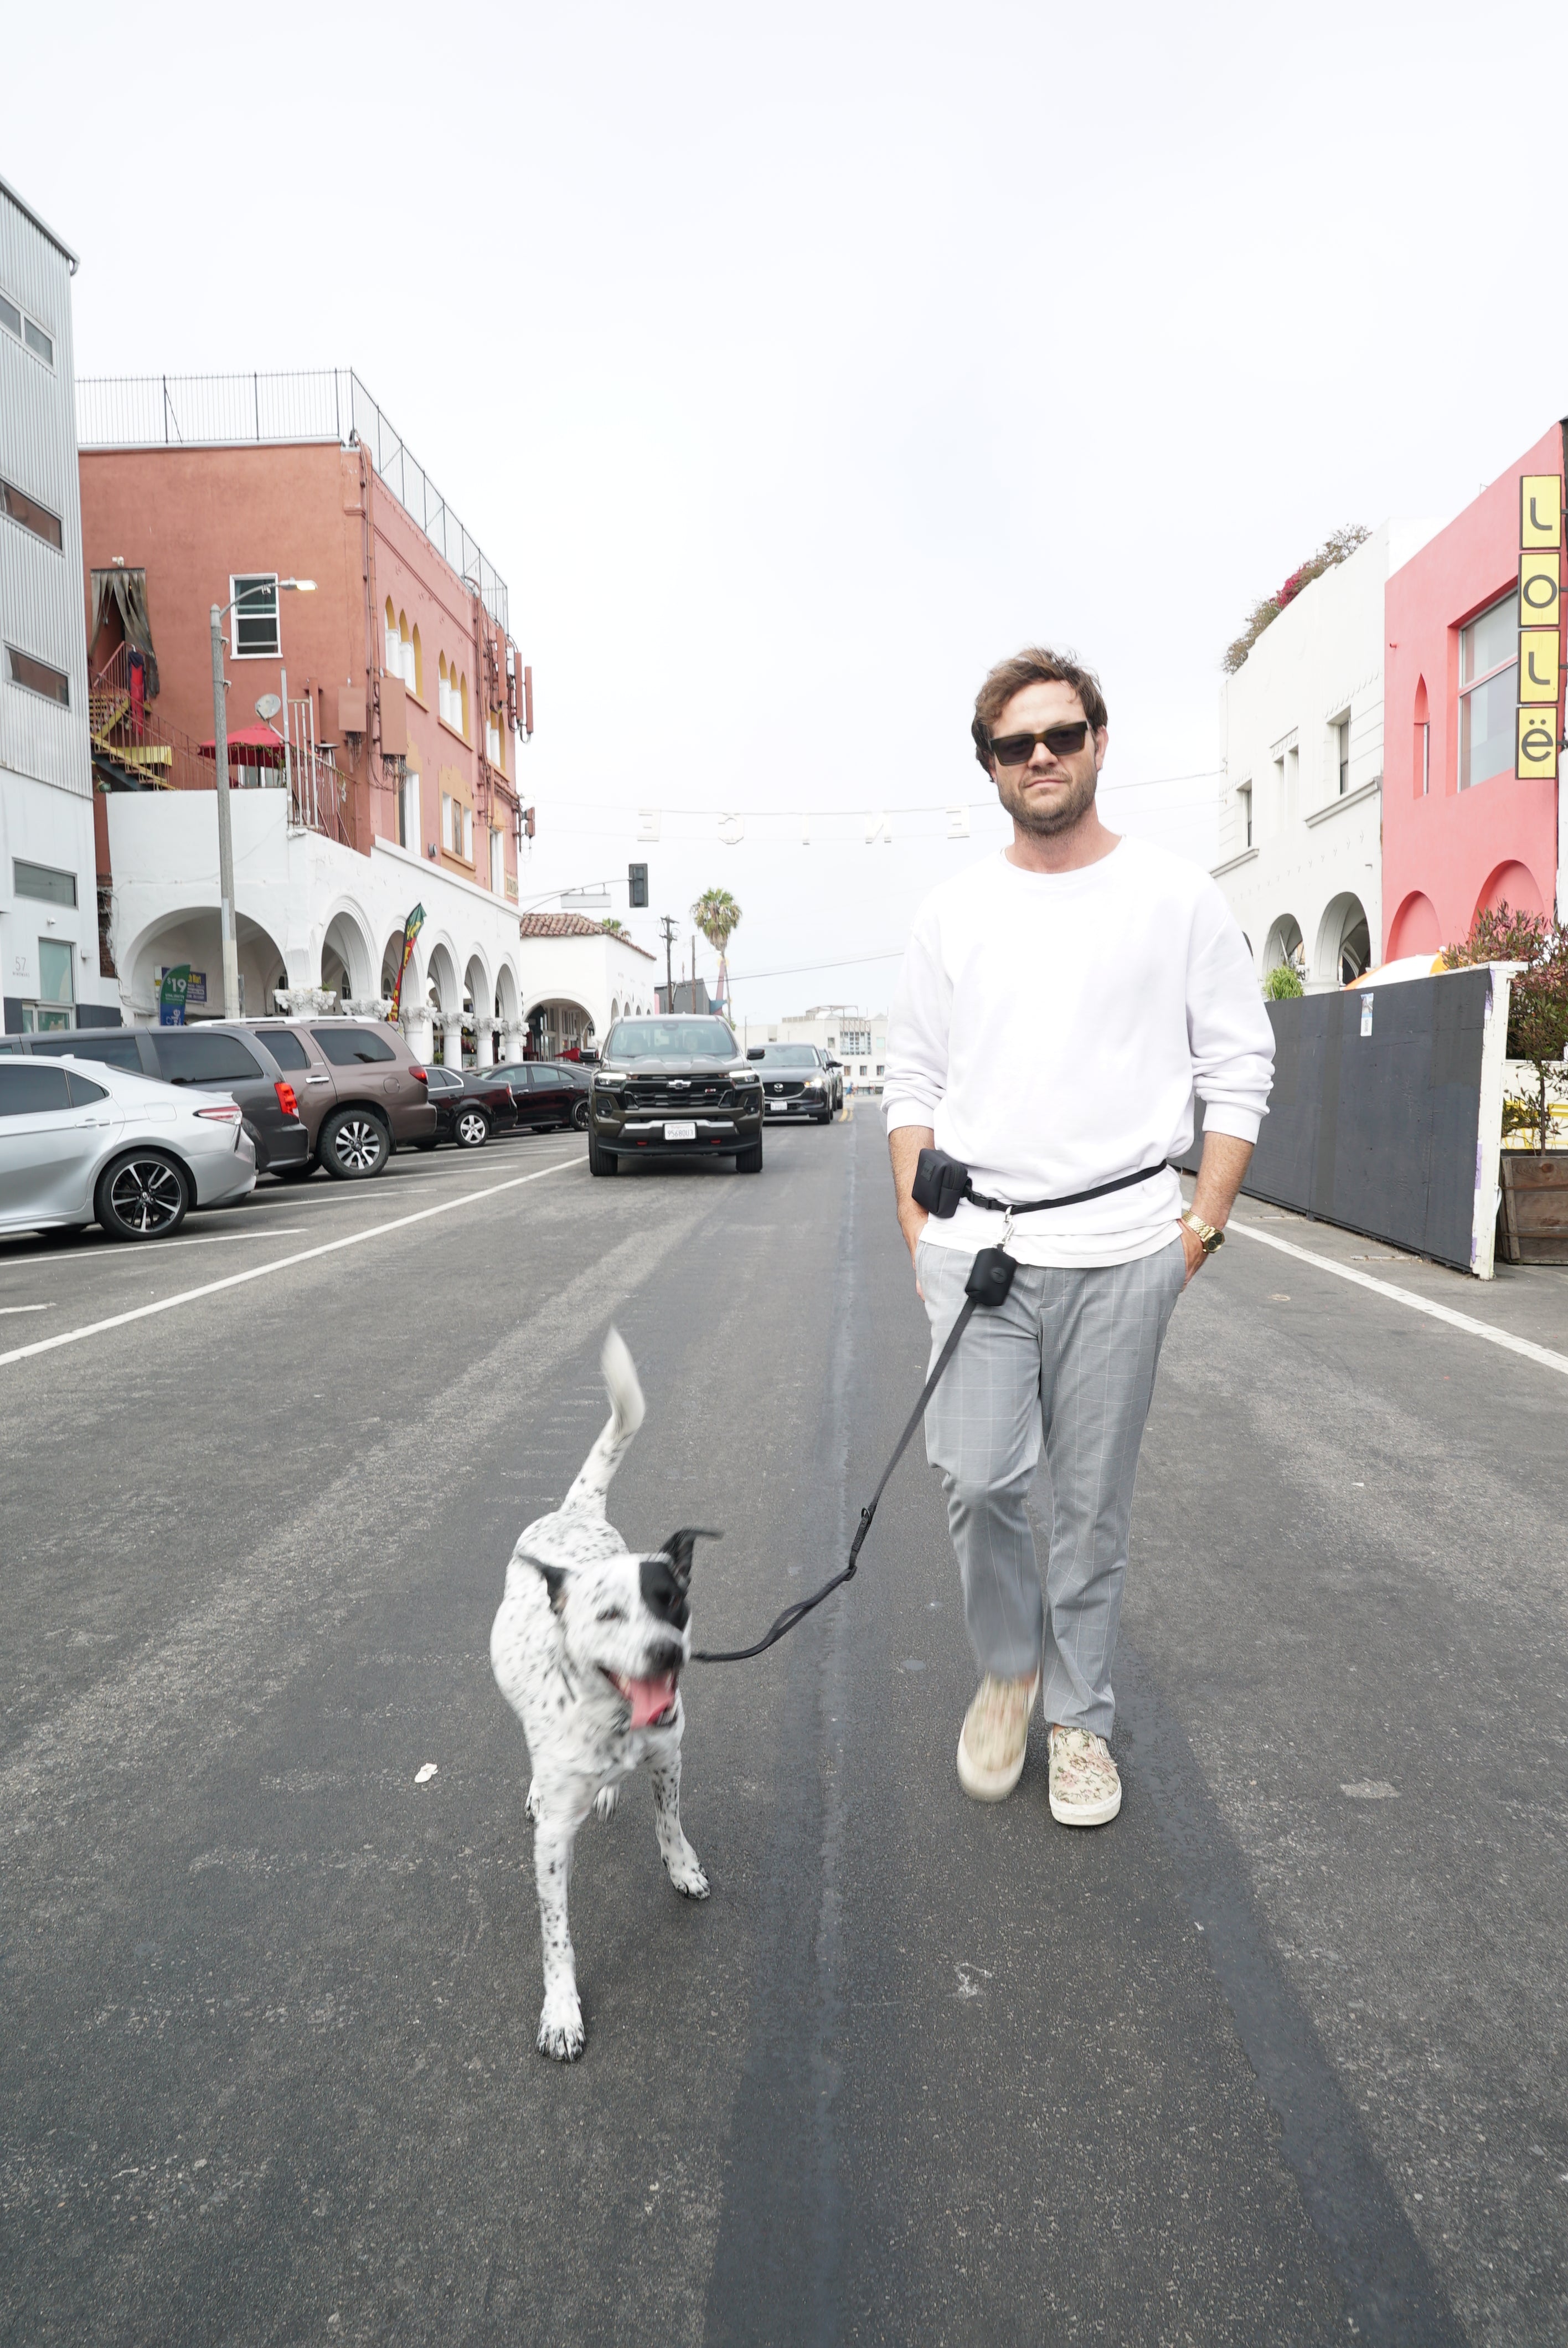 A man wearing a white sweatshirt, gray pants, and sunglasses walks down the street with his black and white spotted dog on a leash. The man is using a Lulu's from Cali hands-free leash in Midnight black, worn as a crossbody. The dog is wearing a harness from the same brand. They are in an urban setting with colorful buildings and parked cars lining the street.